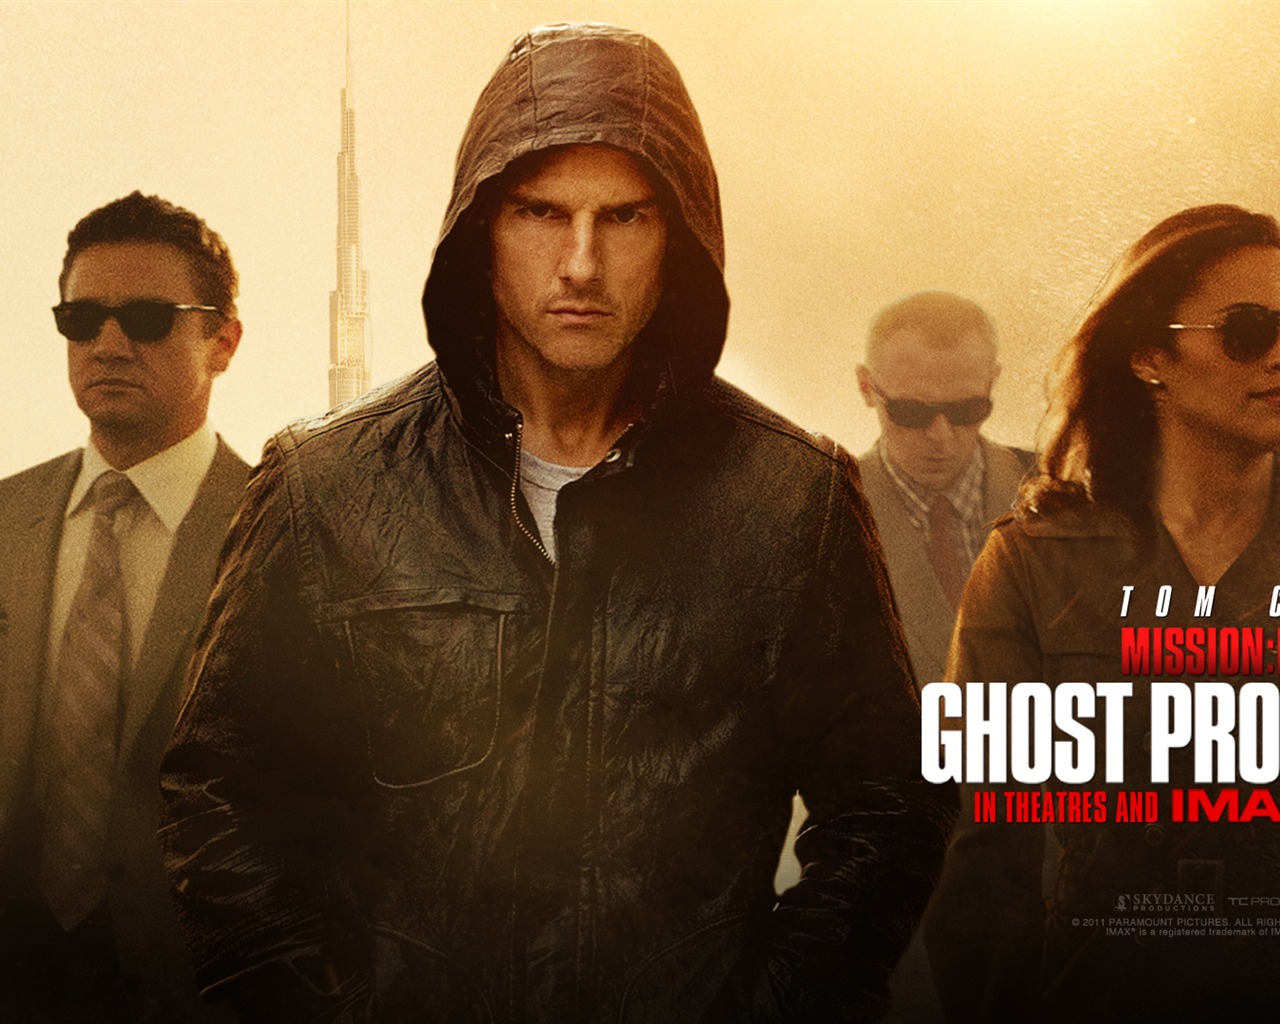 Mission: Impossible - Ghost Protocol 碟中谍4 高清壁纸1 - 1280x1024